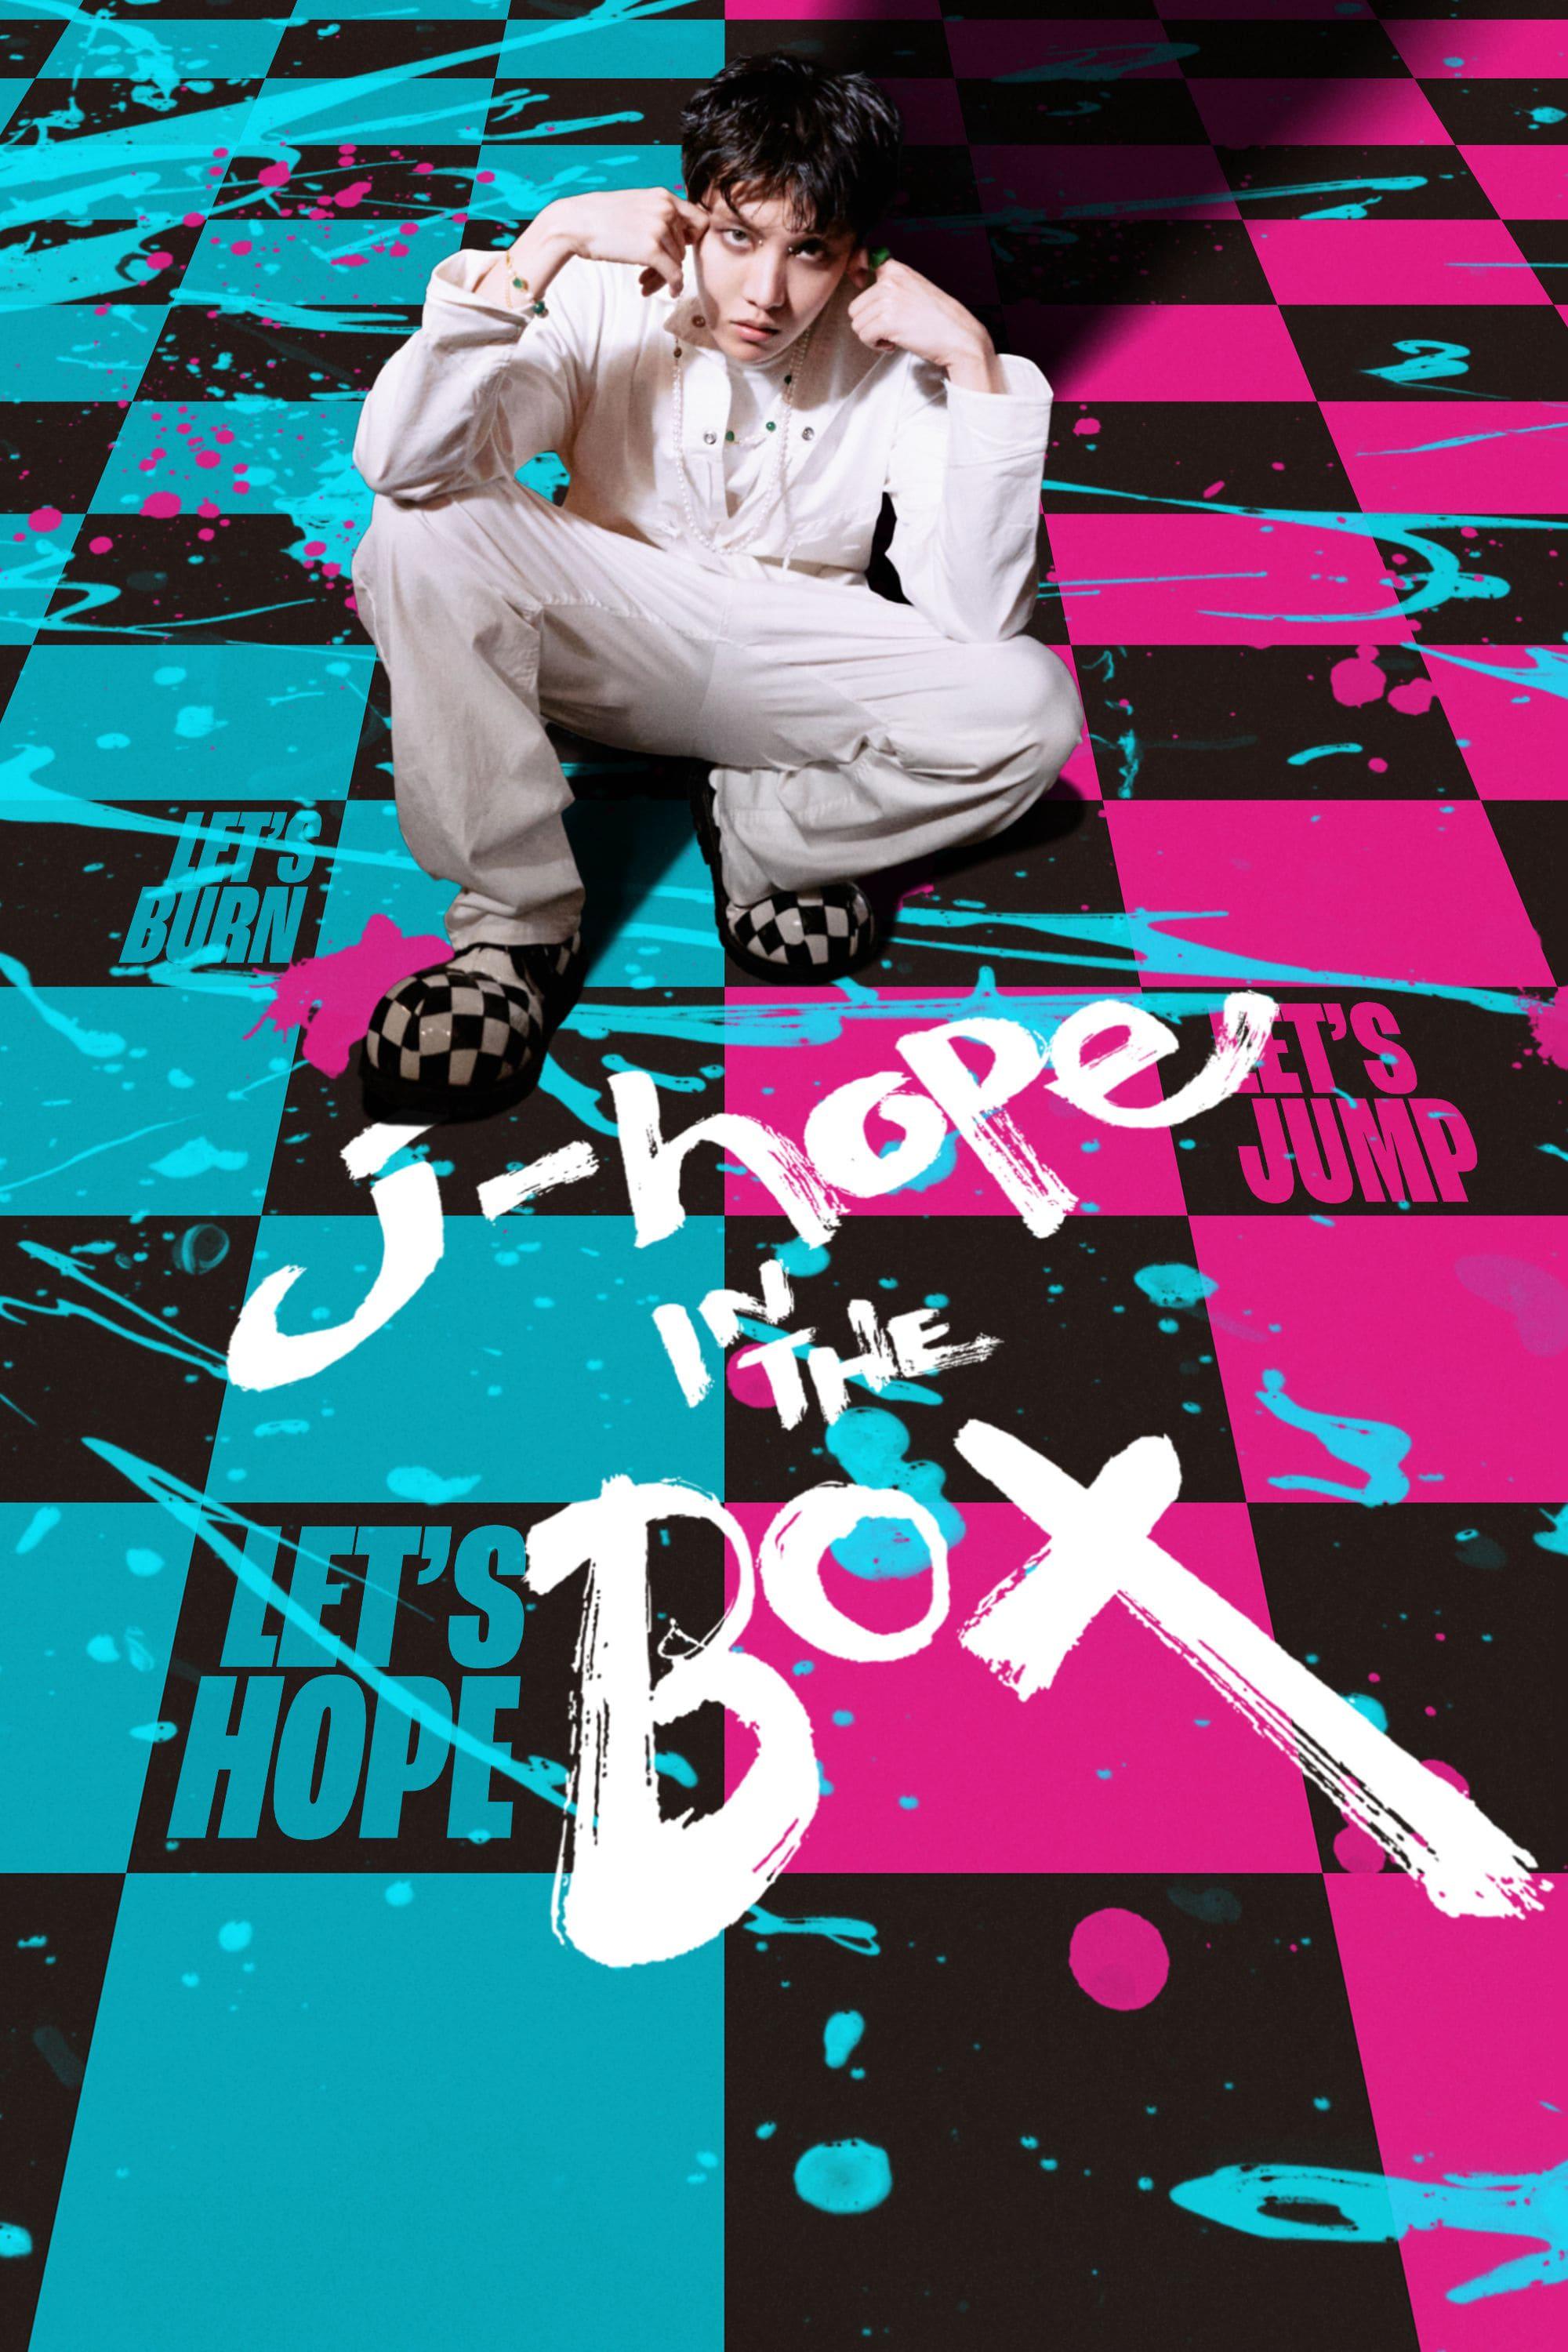 j-hope IN THE BOX poster